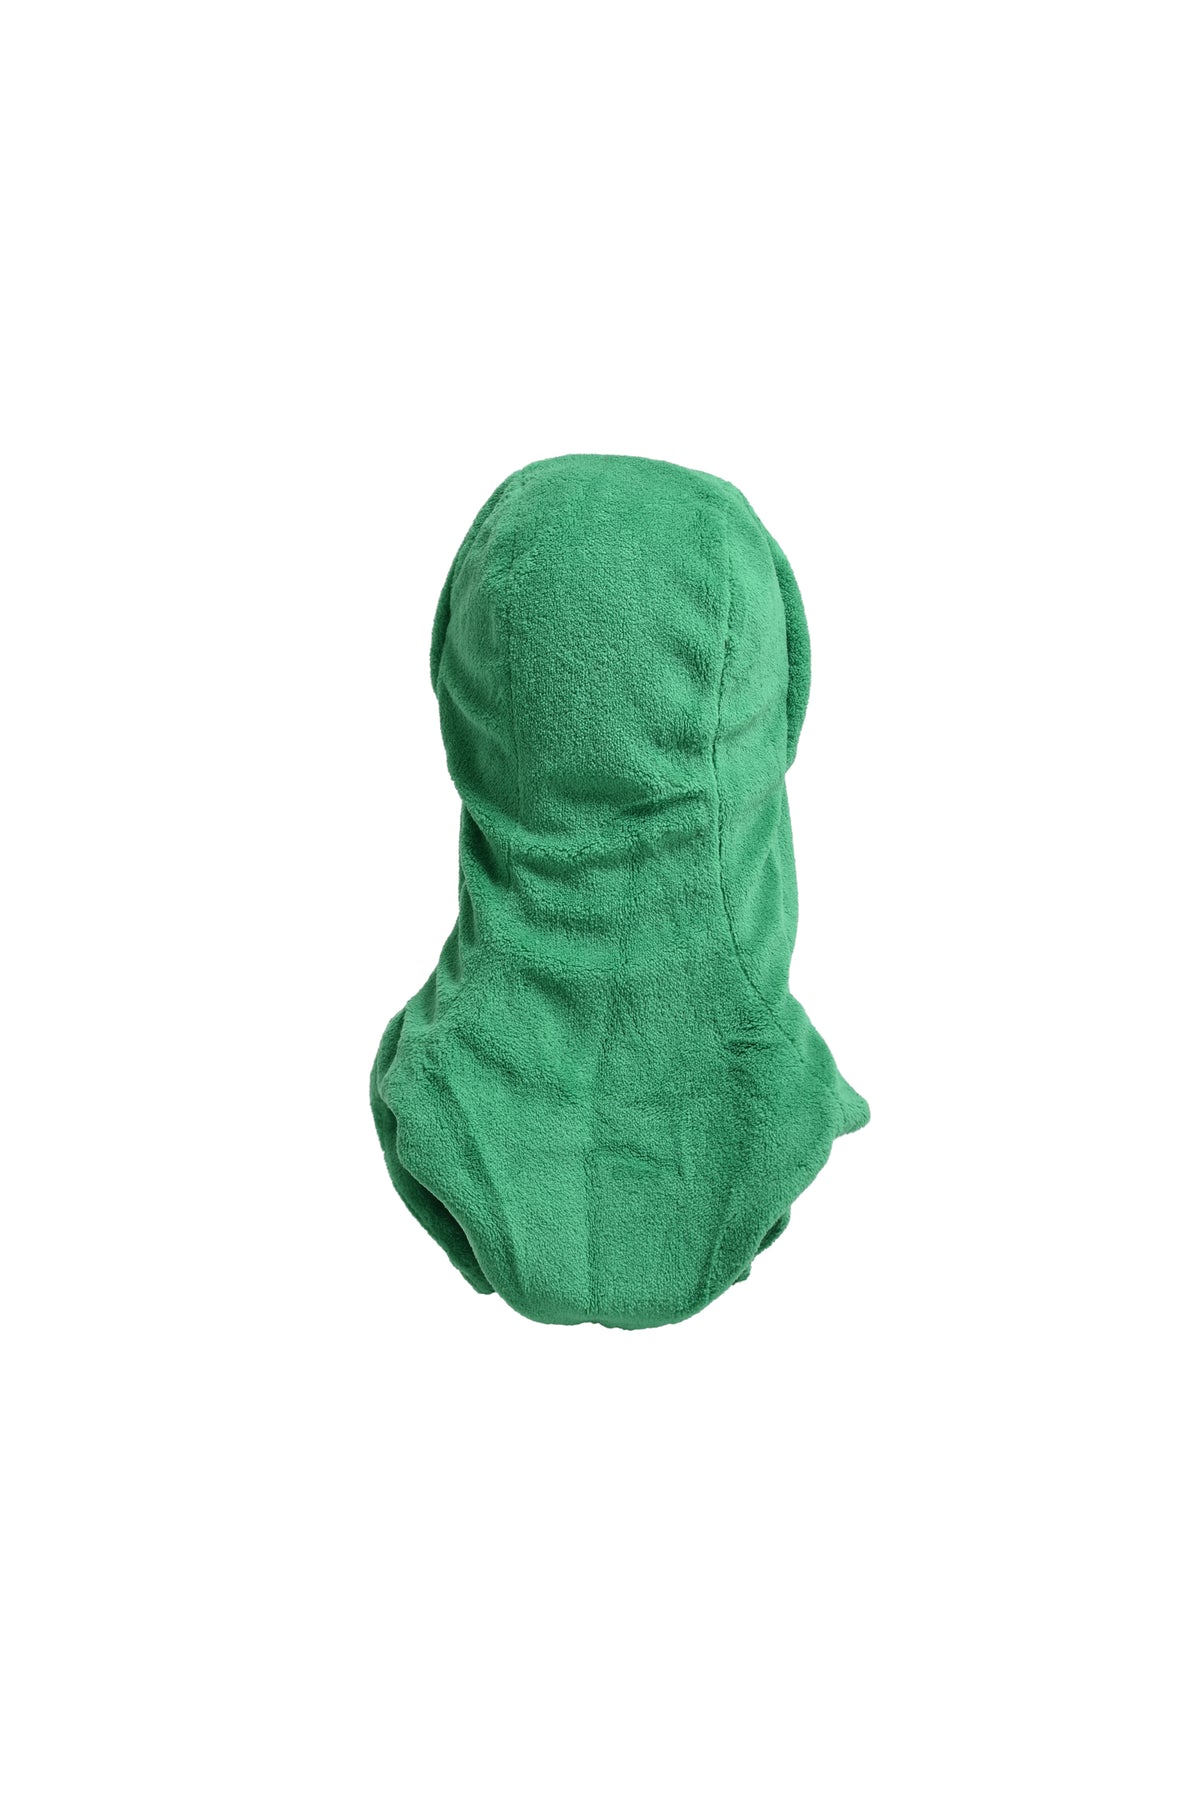 POST ARCHIVE FACTION (PAF) 5.1 BALACLAVA RIGHT / GRN